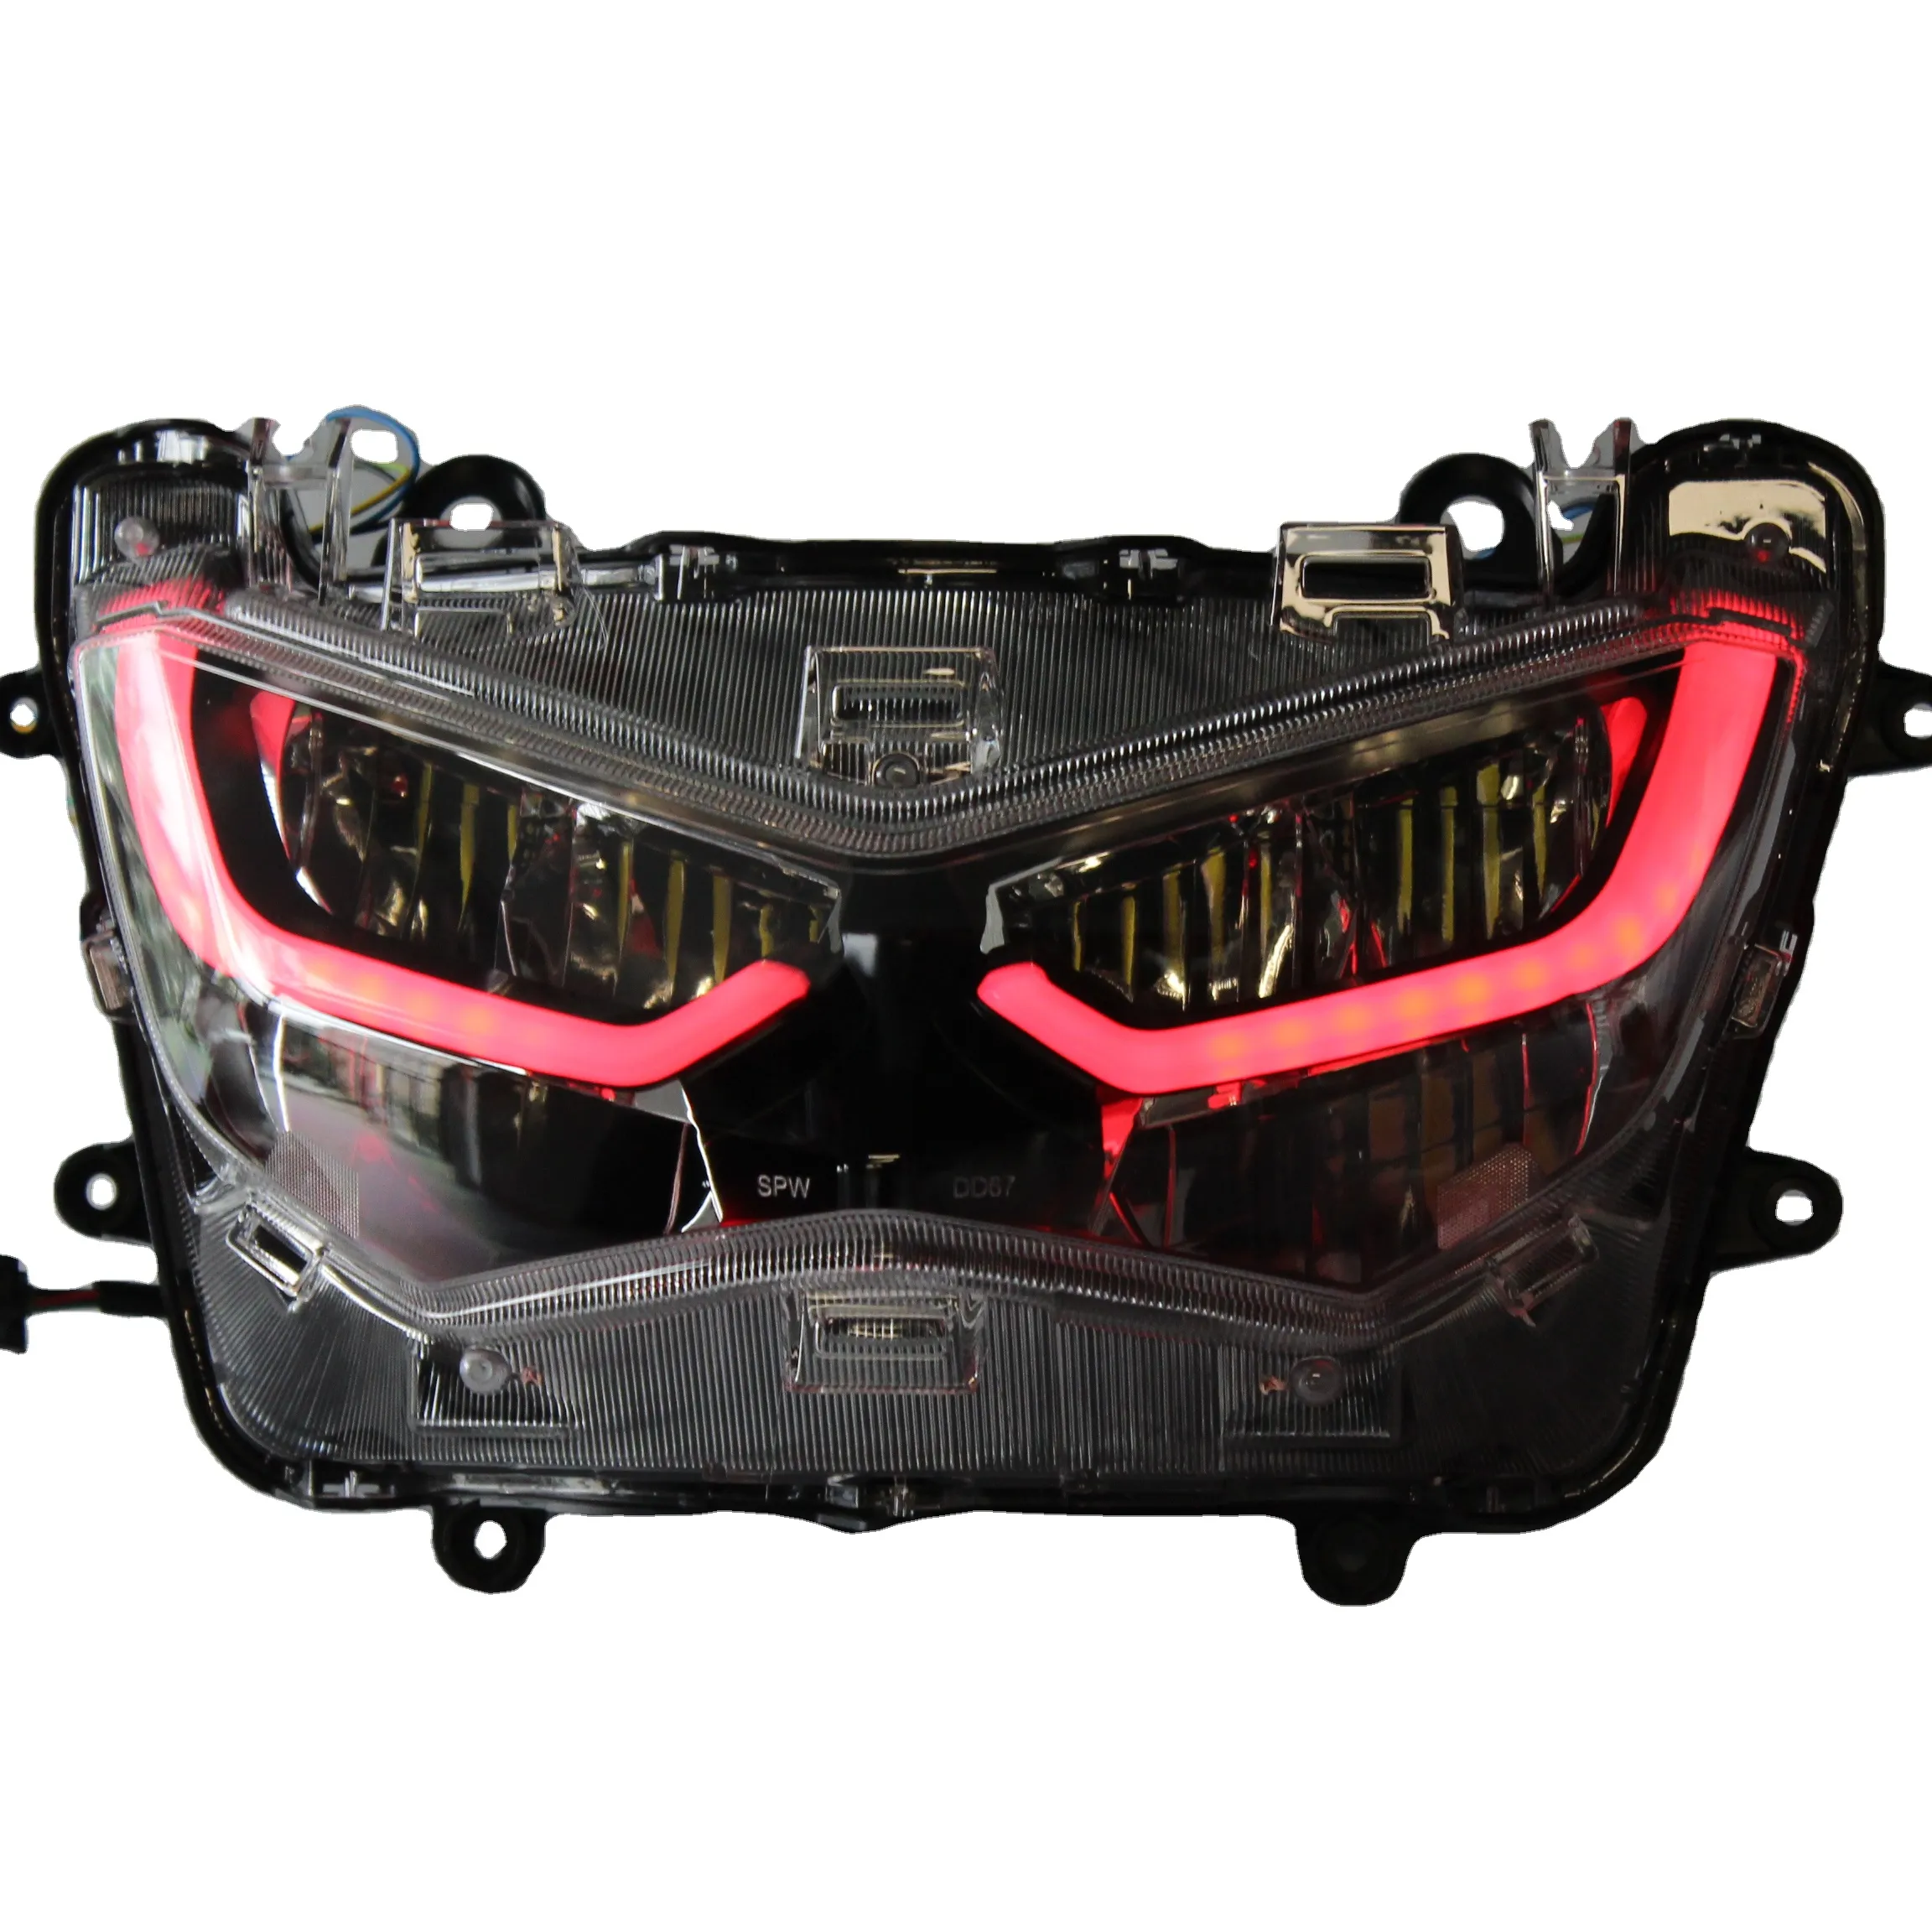 NMAX 155 125 2020 2021 motorcycle LED Headlamp with signal lamp custom lazy eyes design Front Headlight FOR YAMAHA accessories